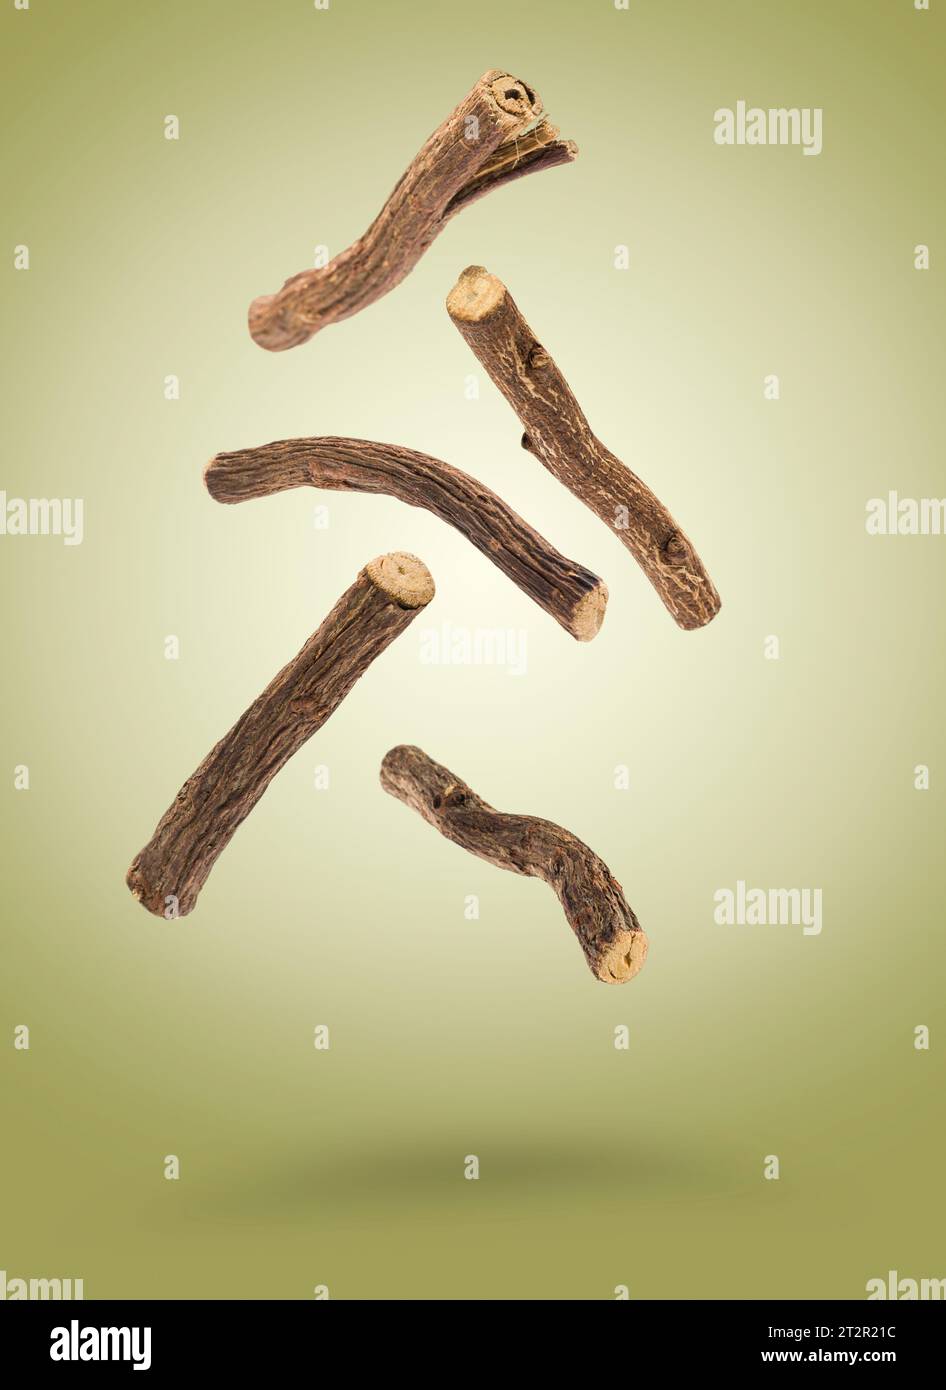 Sticks of liquorice root floating on green background. Stock Photo